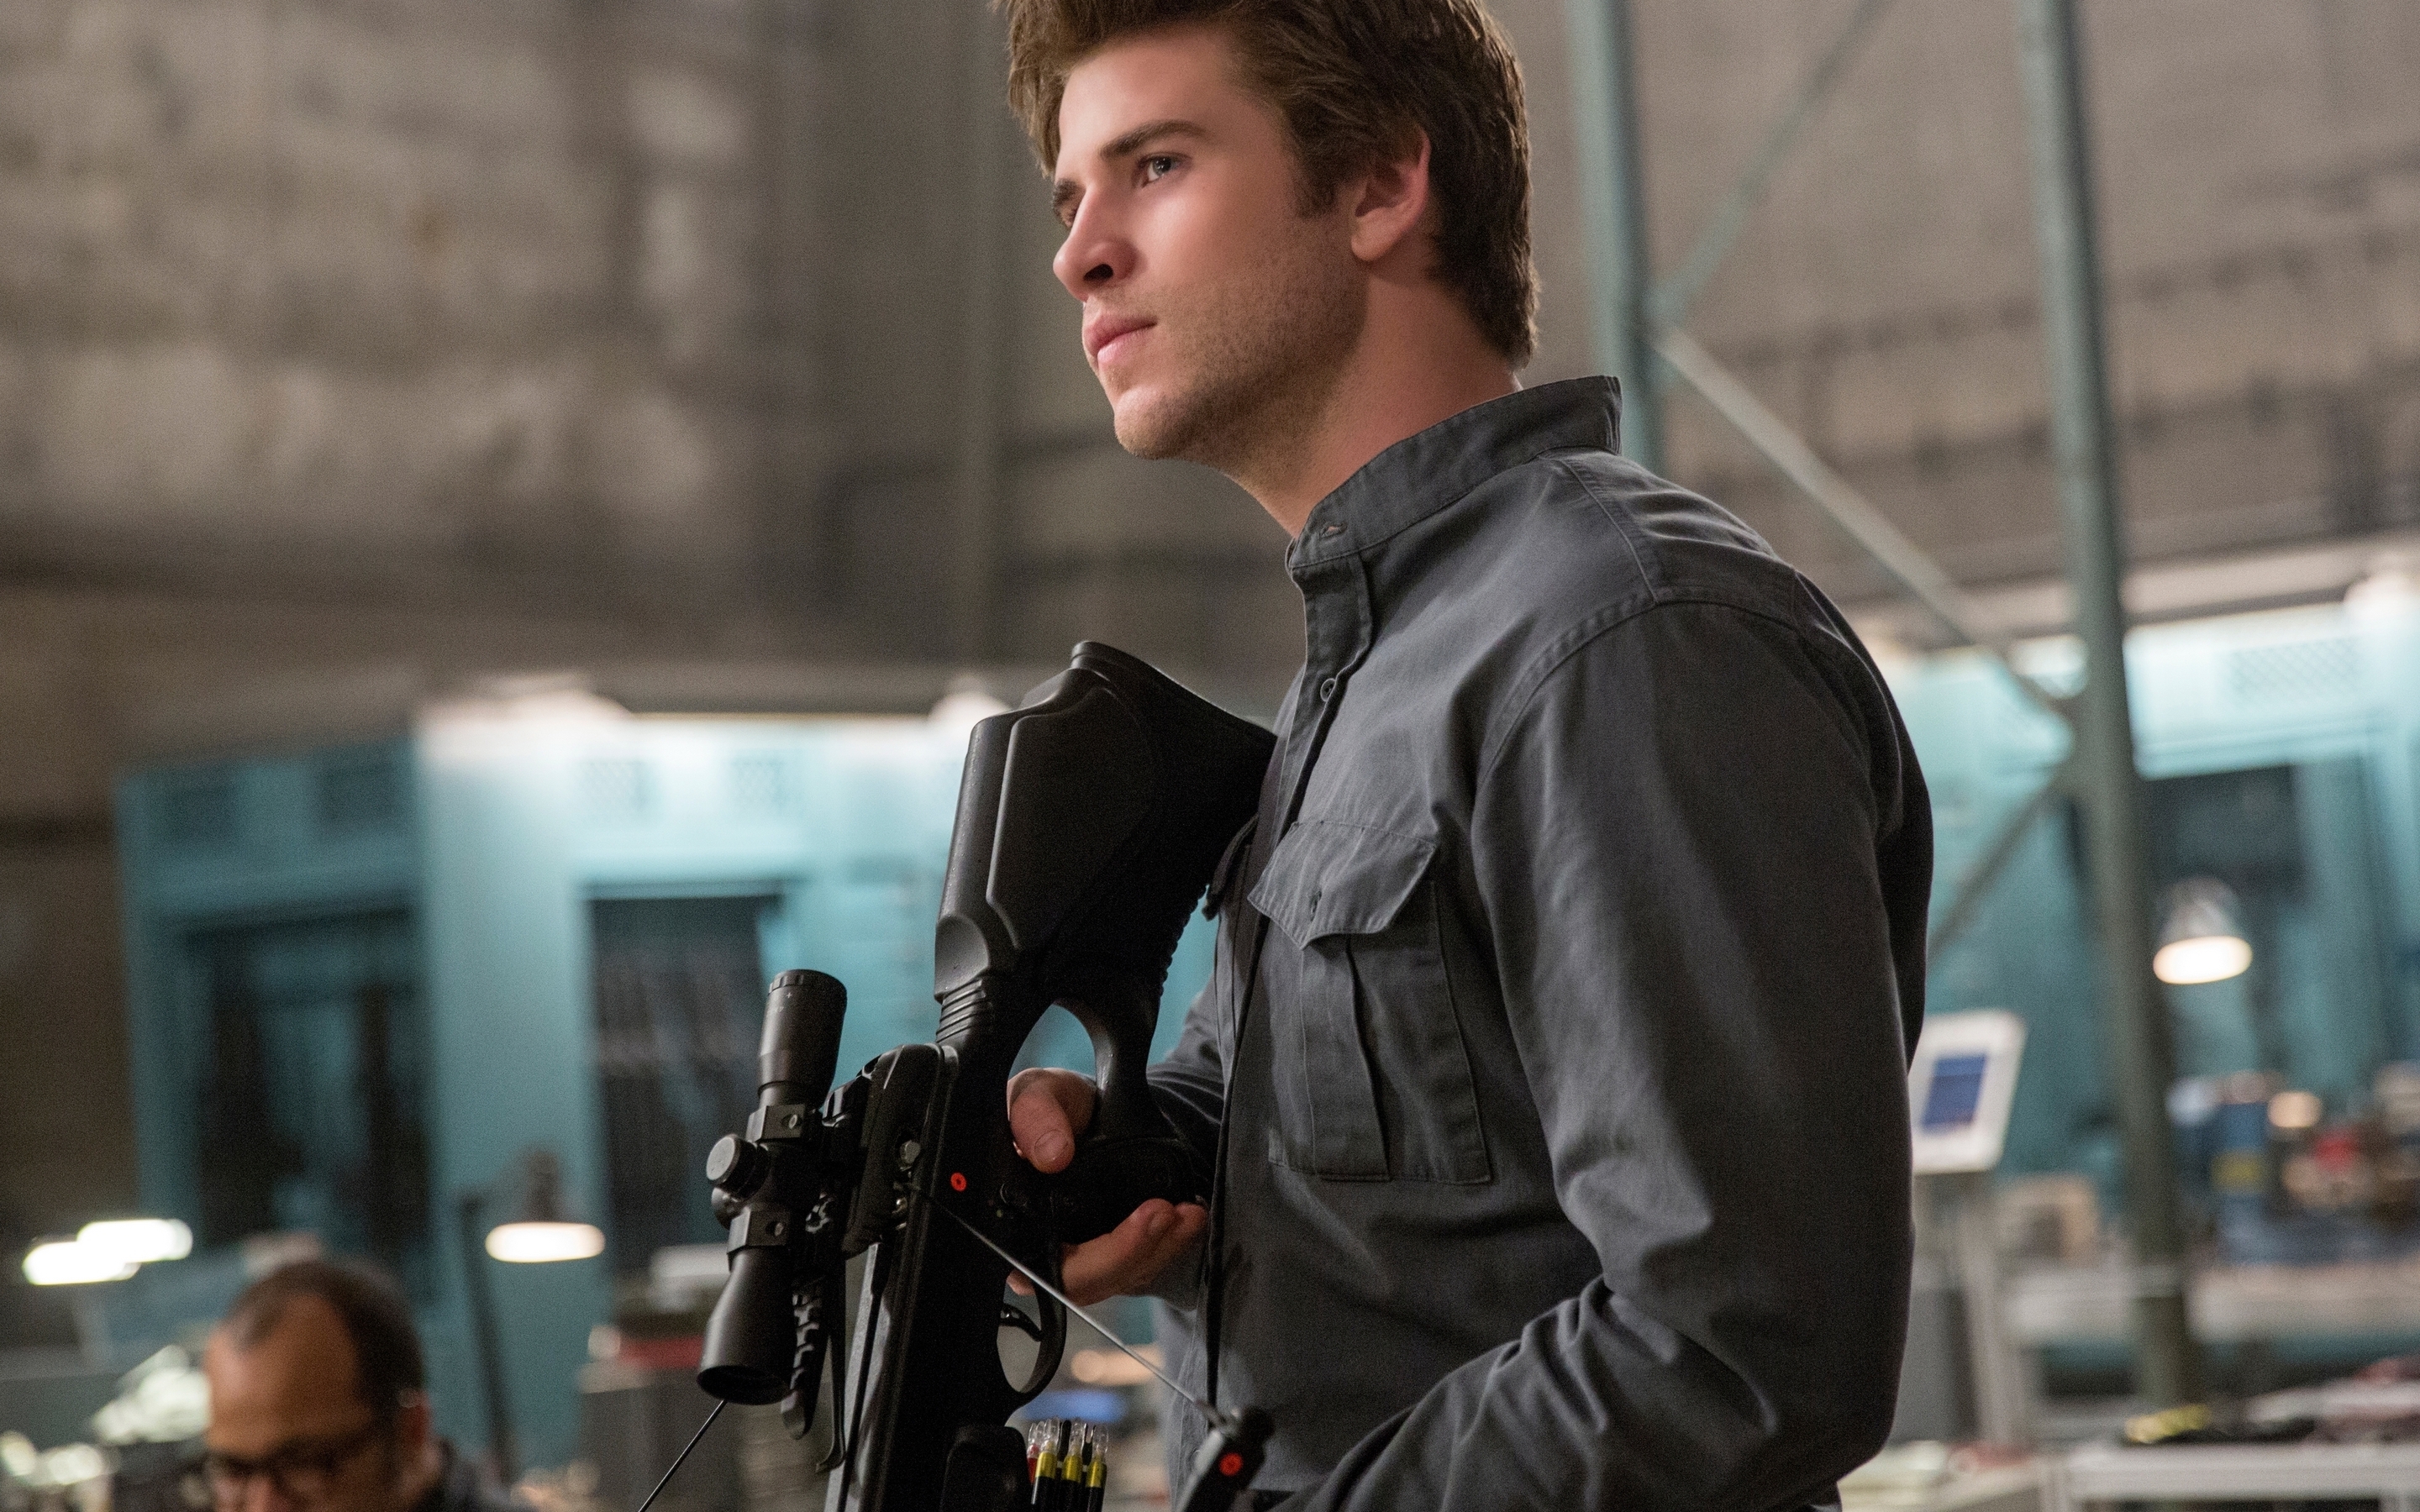 Liam Hemsworth in The Hunger Games for 2880 x 1800 Retina Display resolution